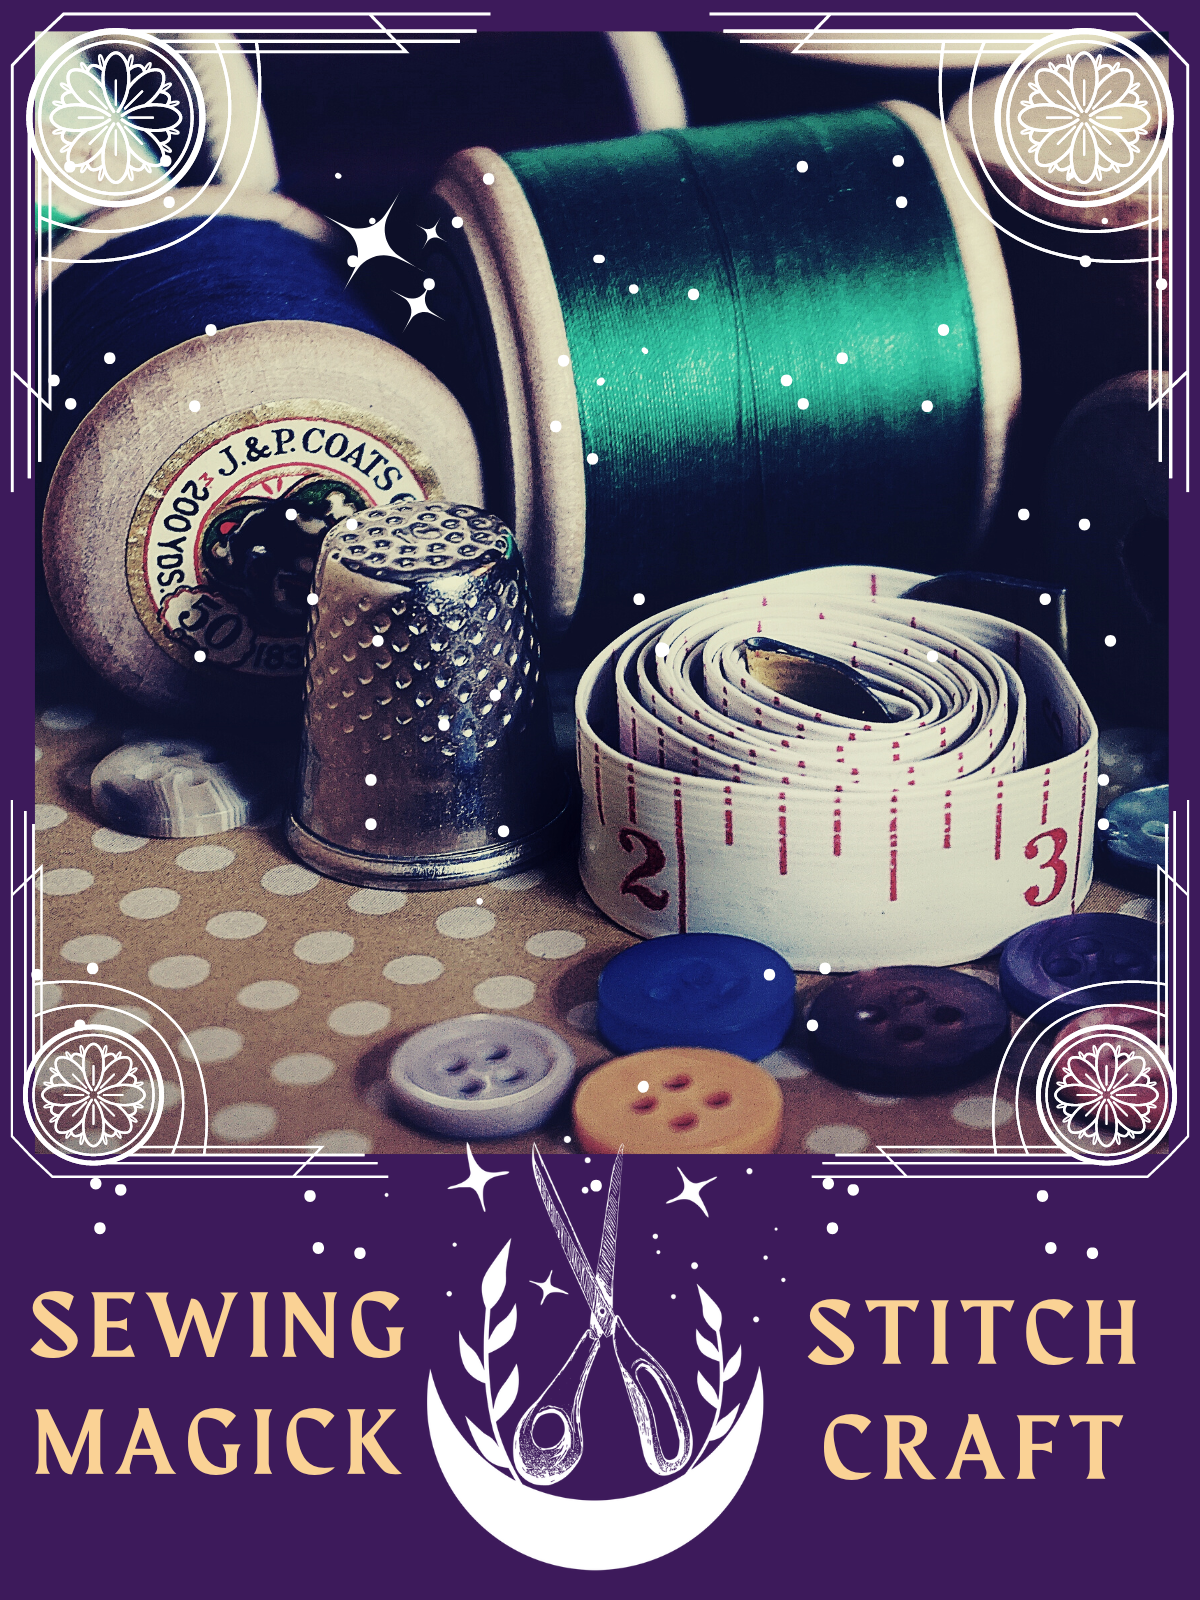 sewing magic thimble and threads